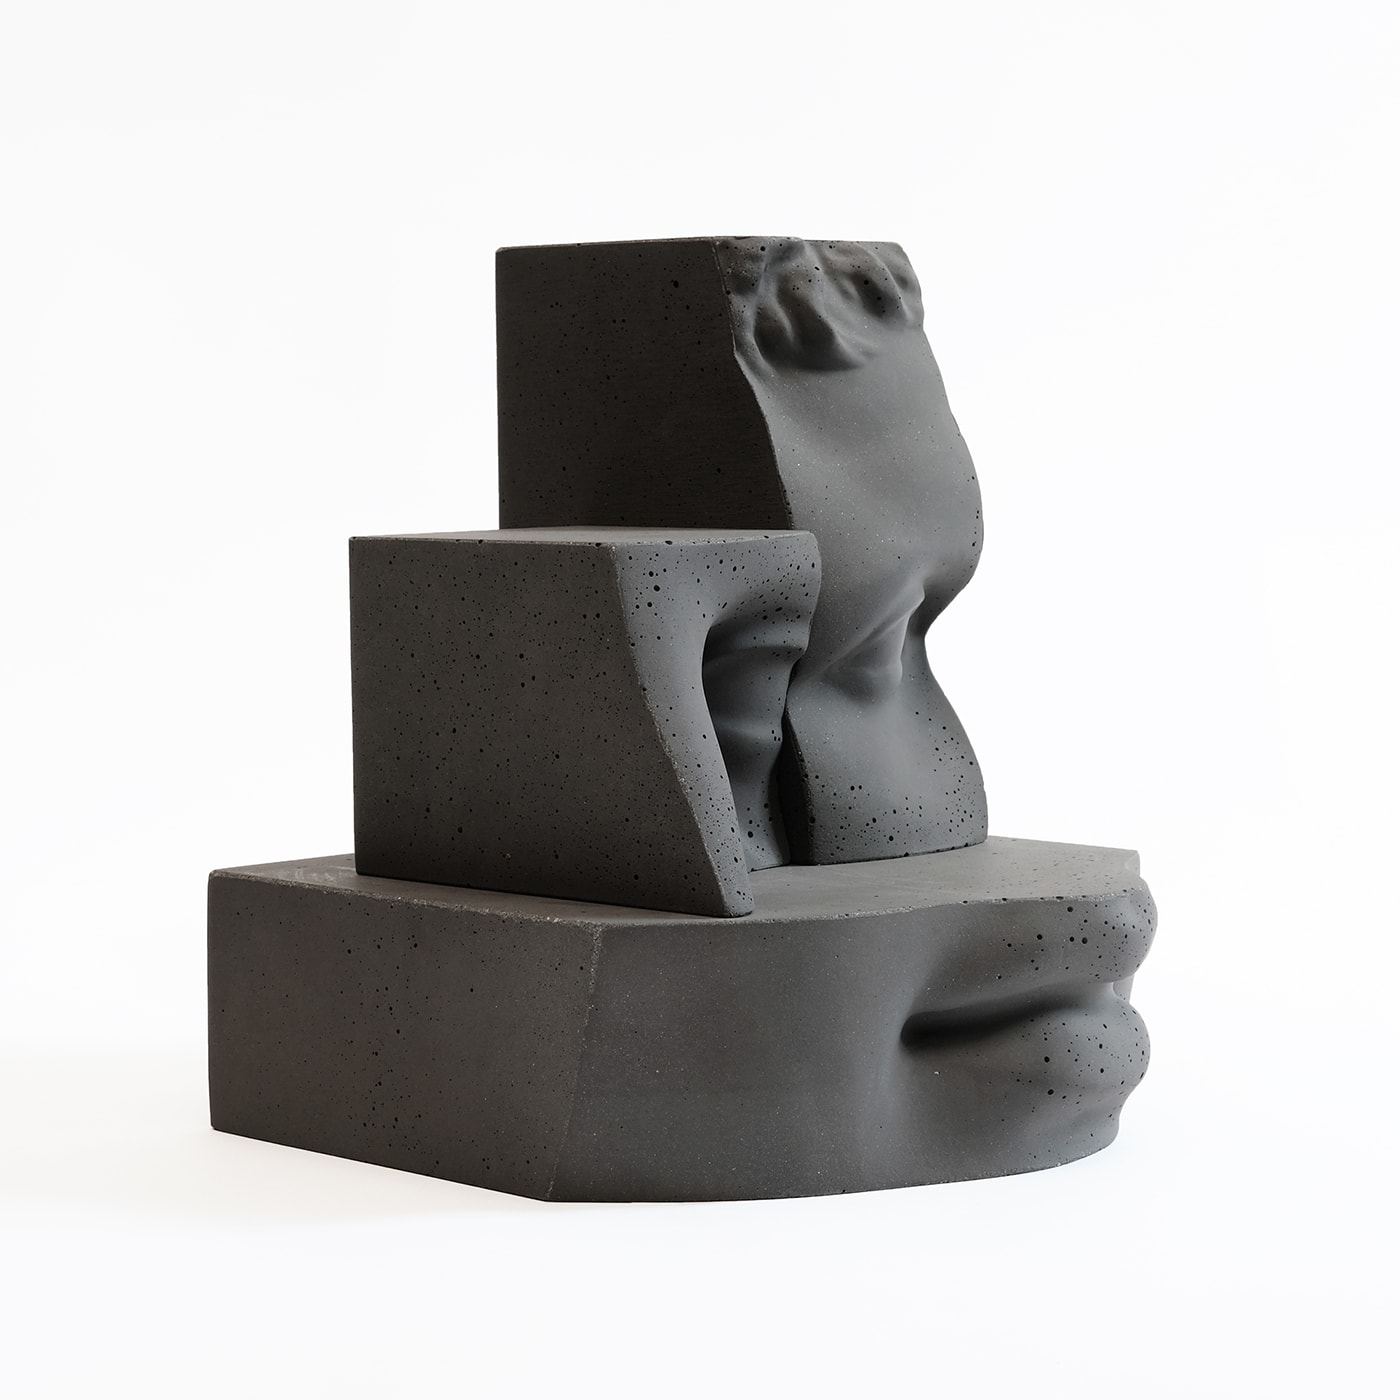 Black Hermes sculpture - Paolo Giordano